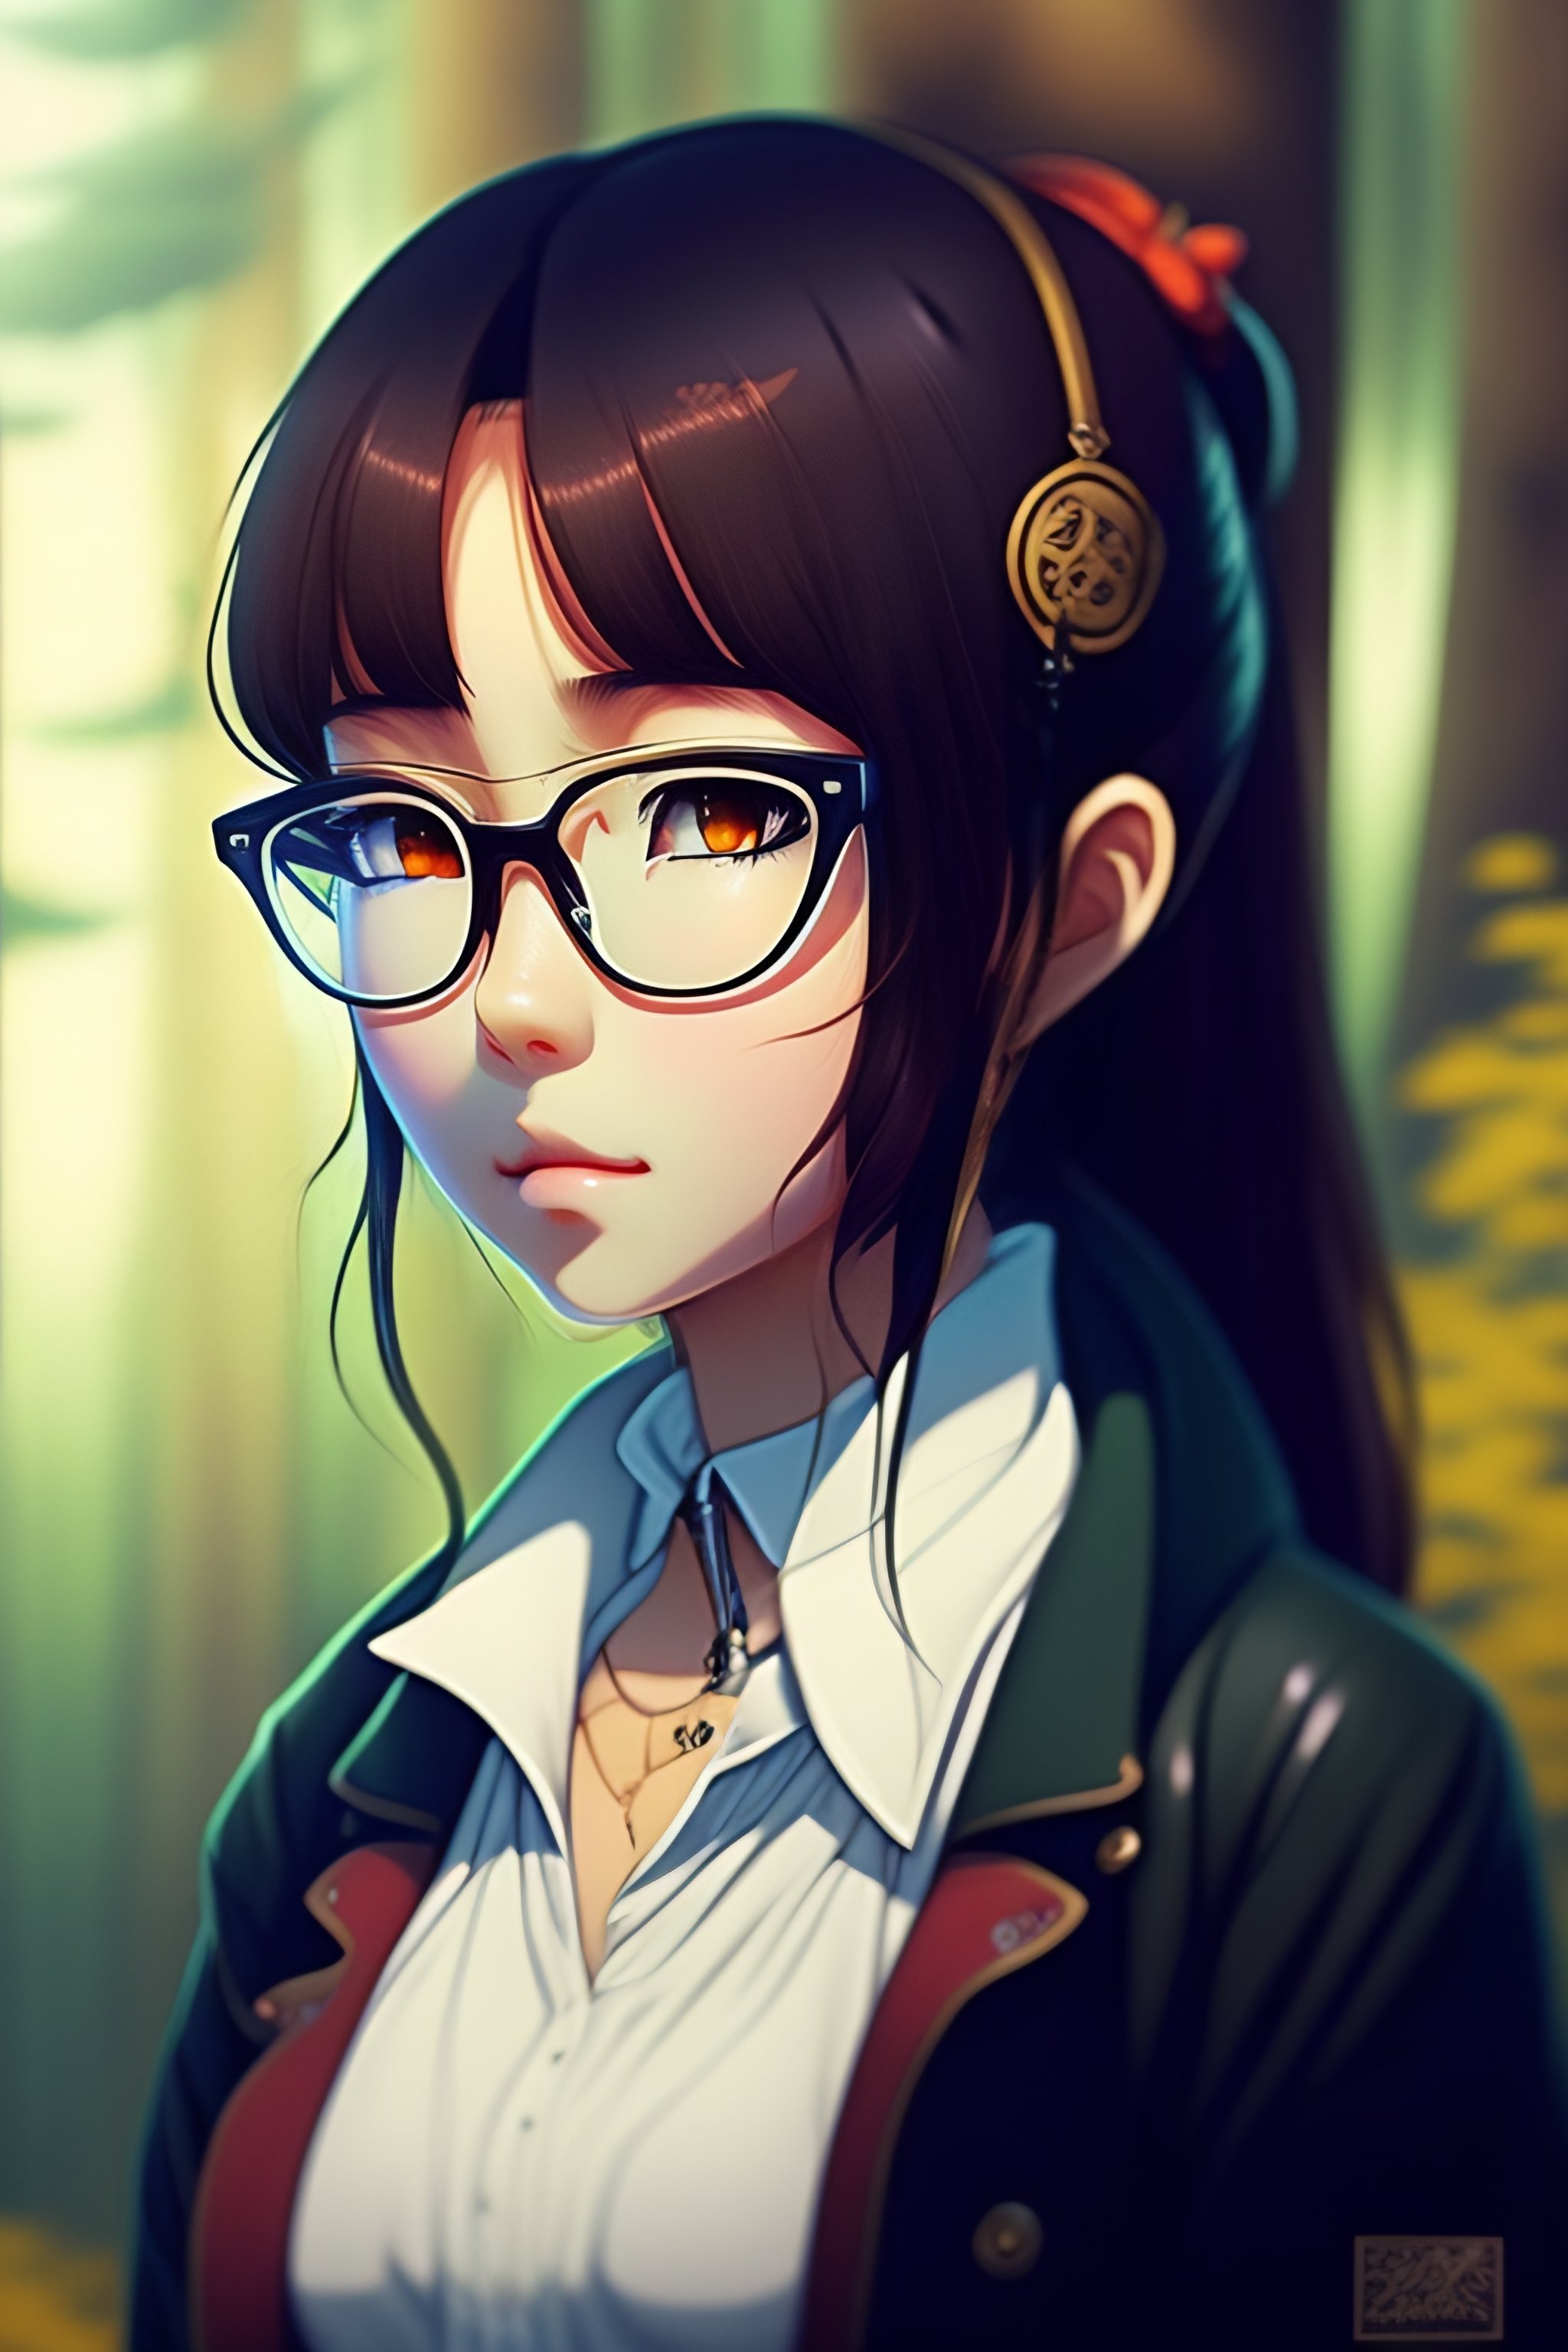 Lexica - Girl, spectacles, anime style, ghibli, forest, apocalyptic,